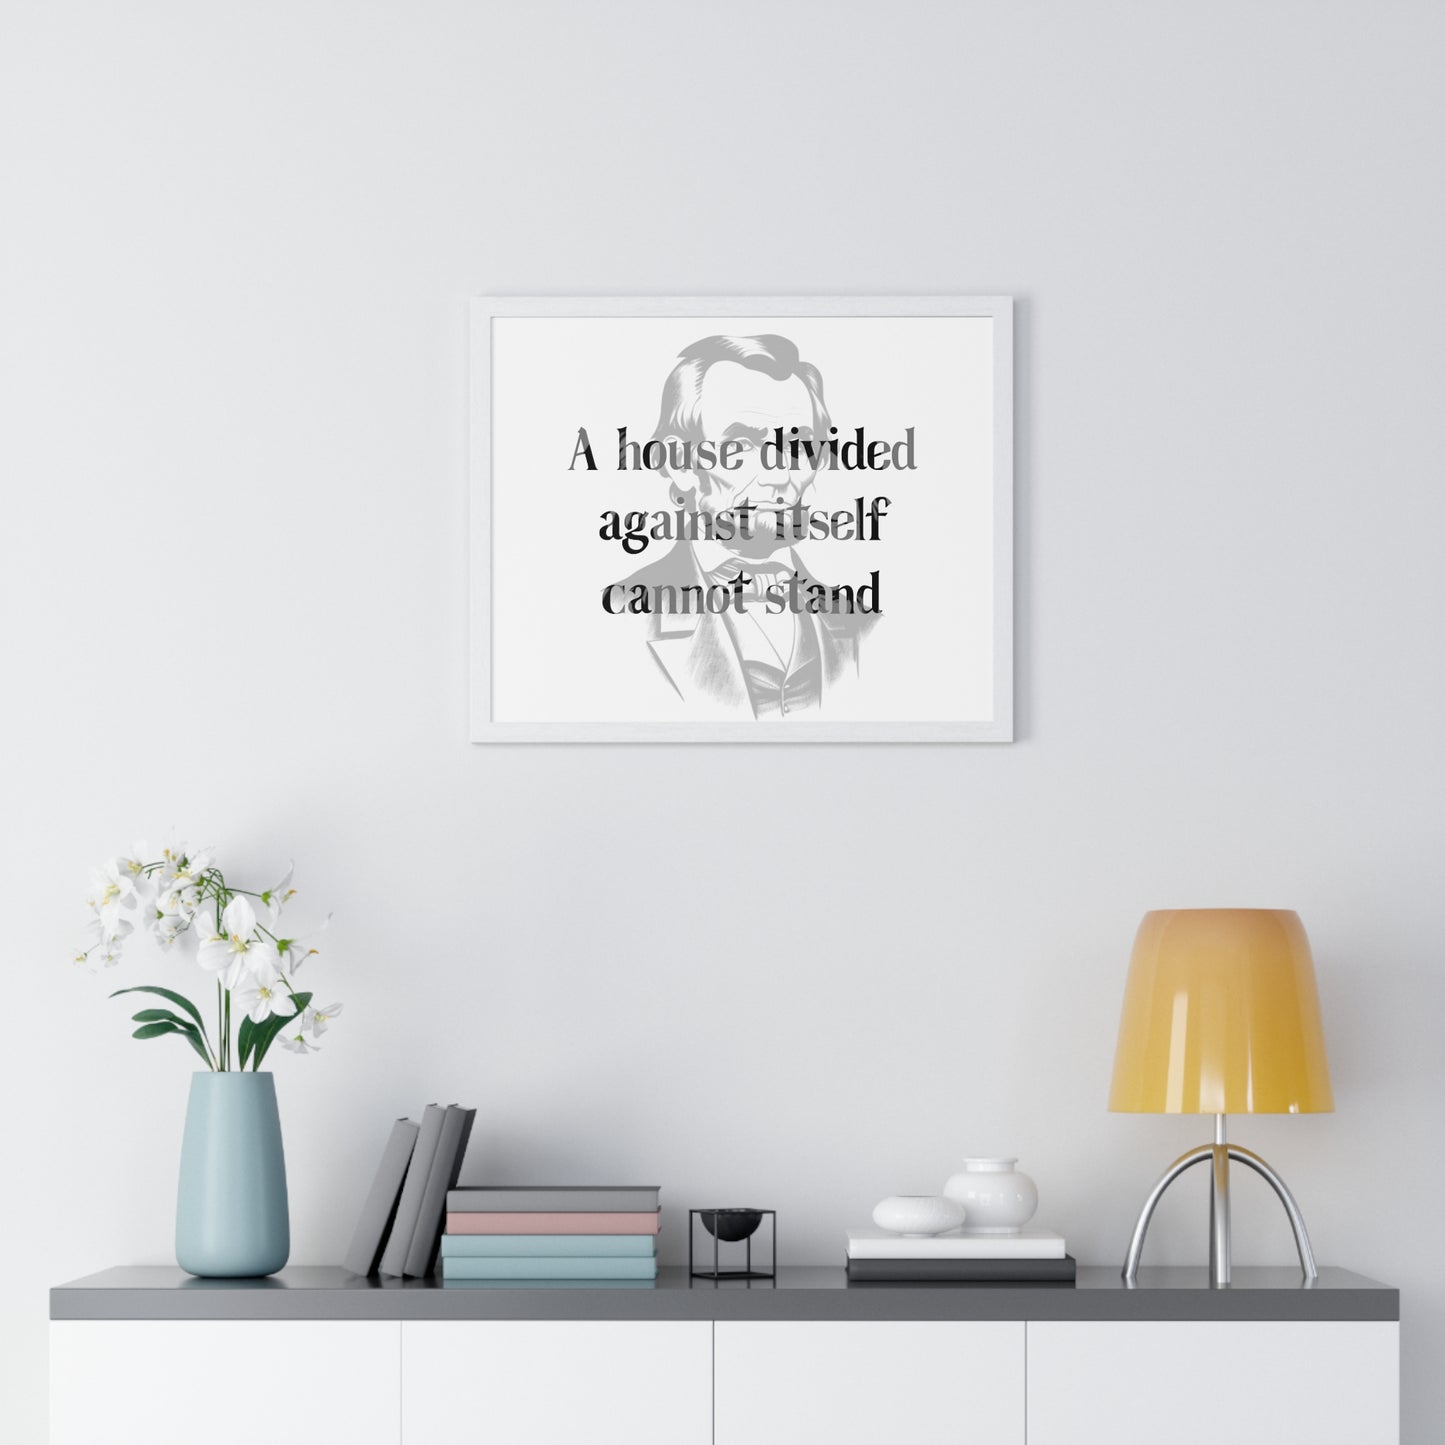 Abraham Lincoln Quote 6, Poster Art, Horizontal Light Print, 16th President of the United States, American Patriots, AI Art, Political Art, Poster Prints, Presidential Portraits, Presidential Quotes, Inspirational Quotes